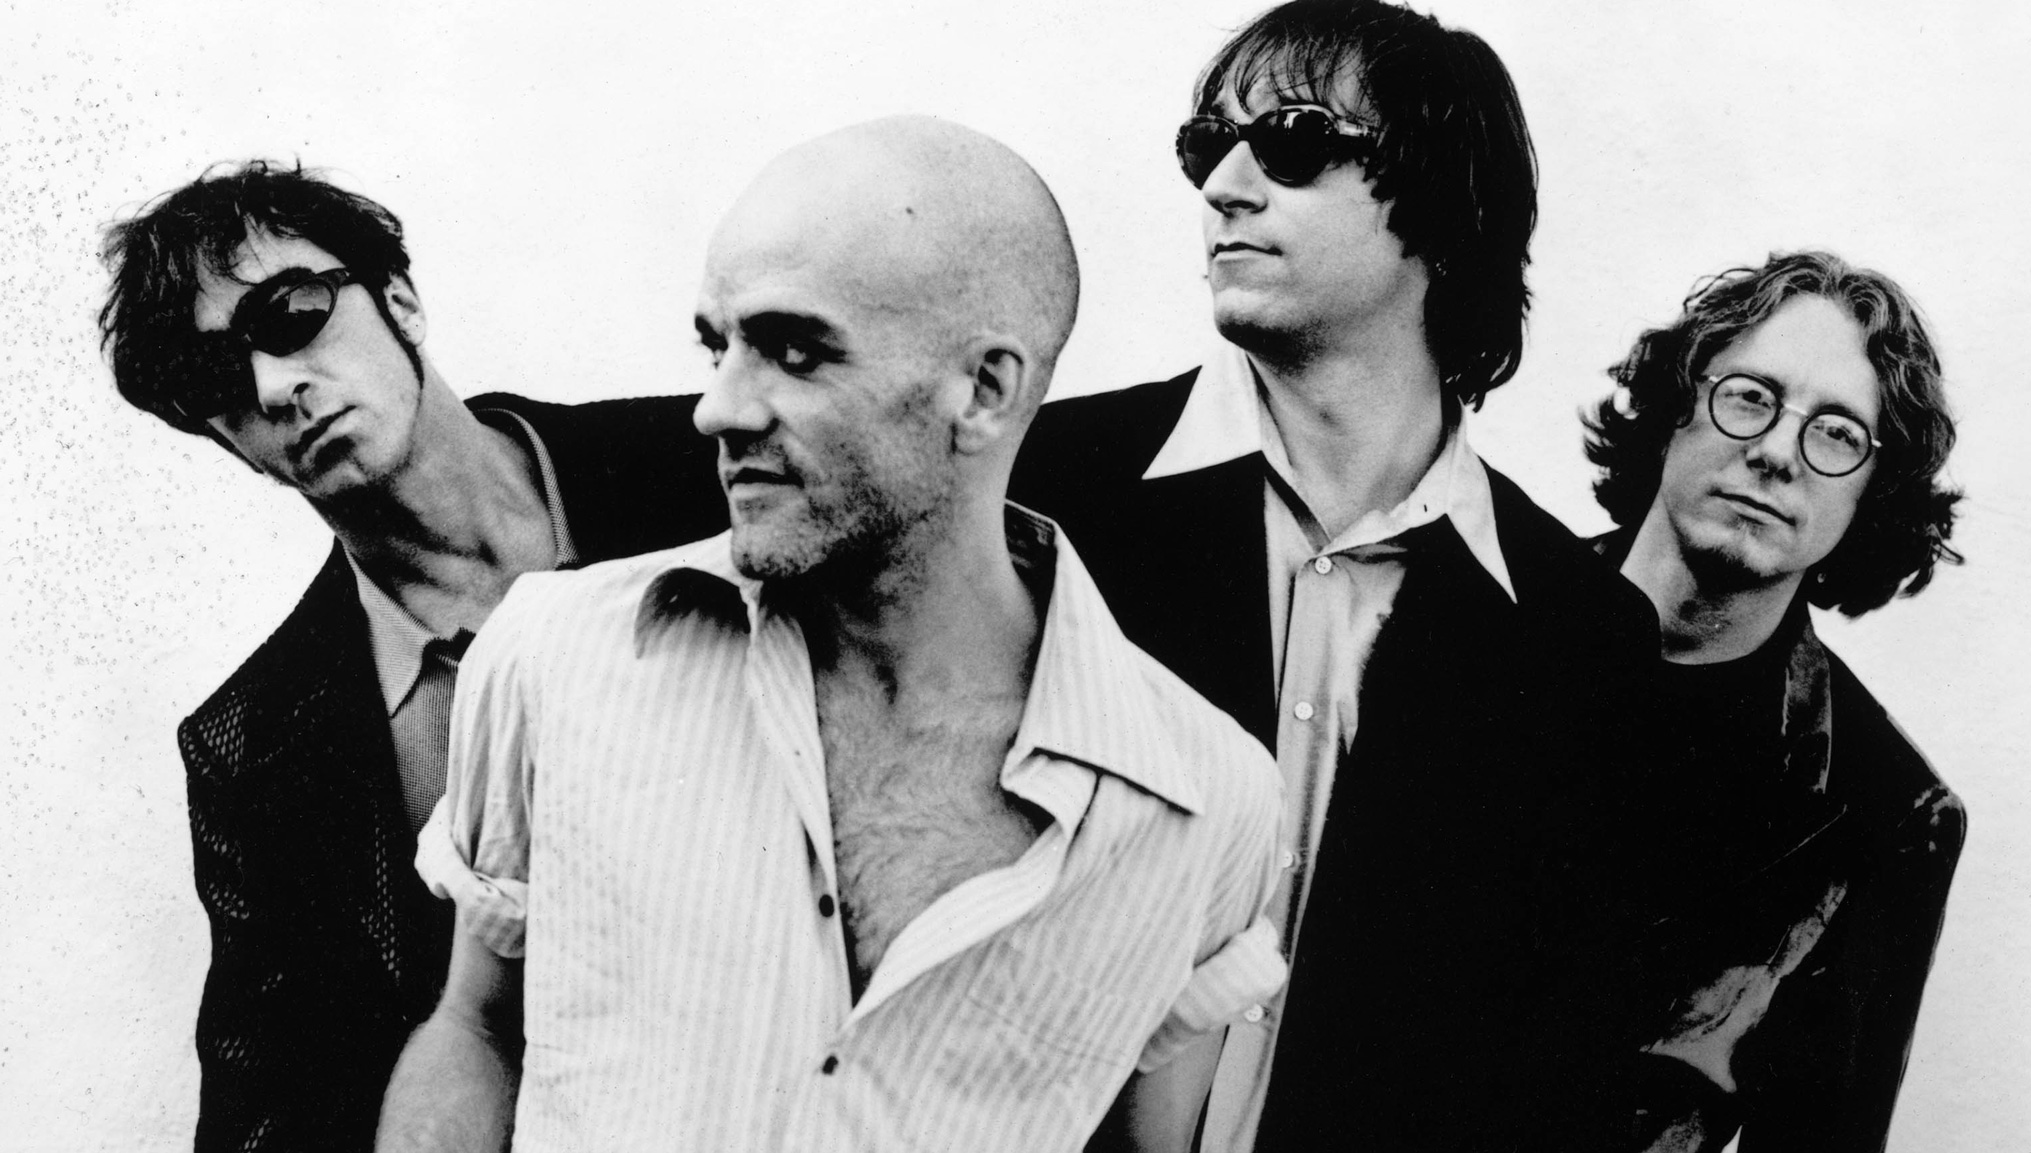 R.E.M. unveil documentary behind their ‘Automatic For The People’ classic album